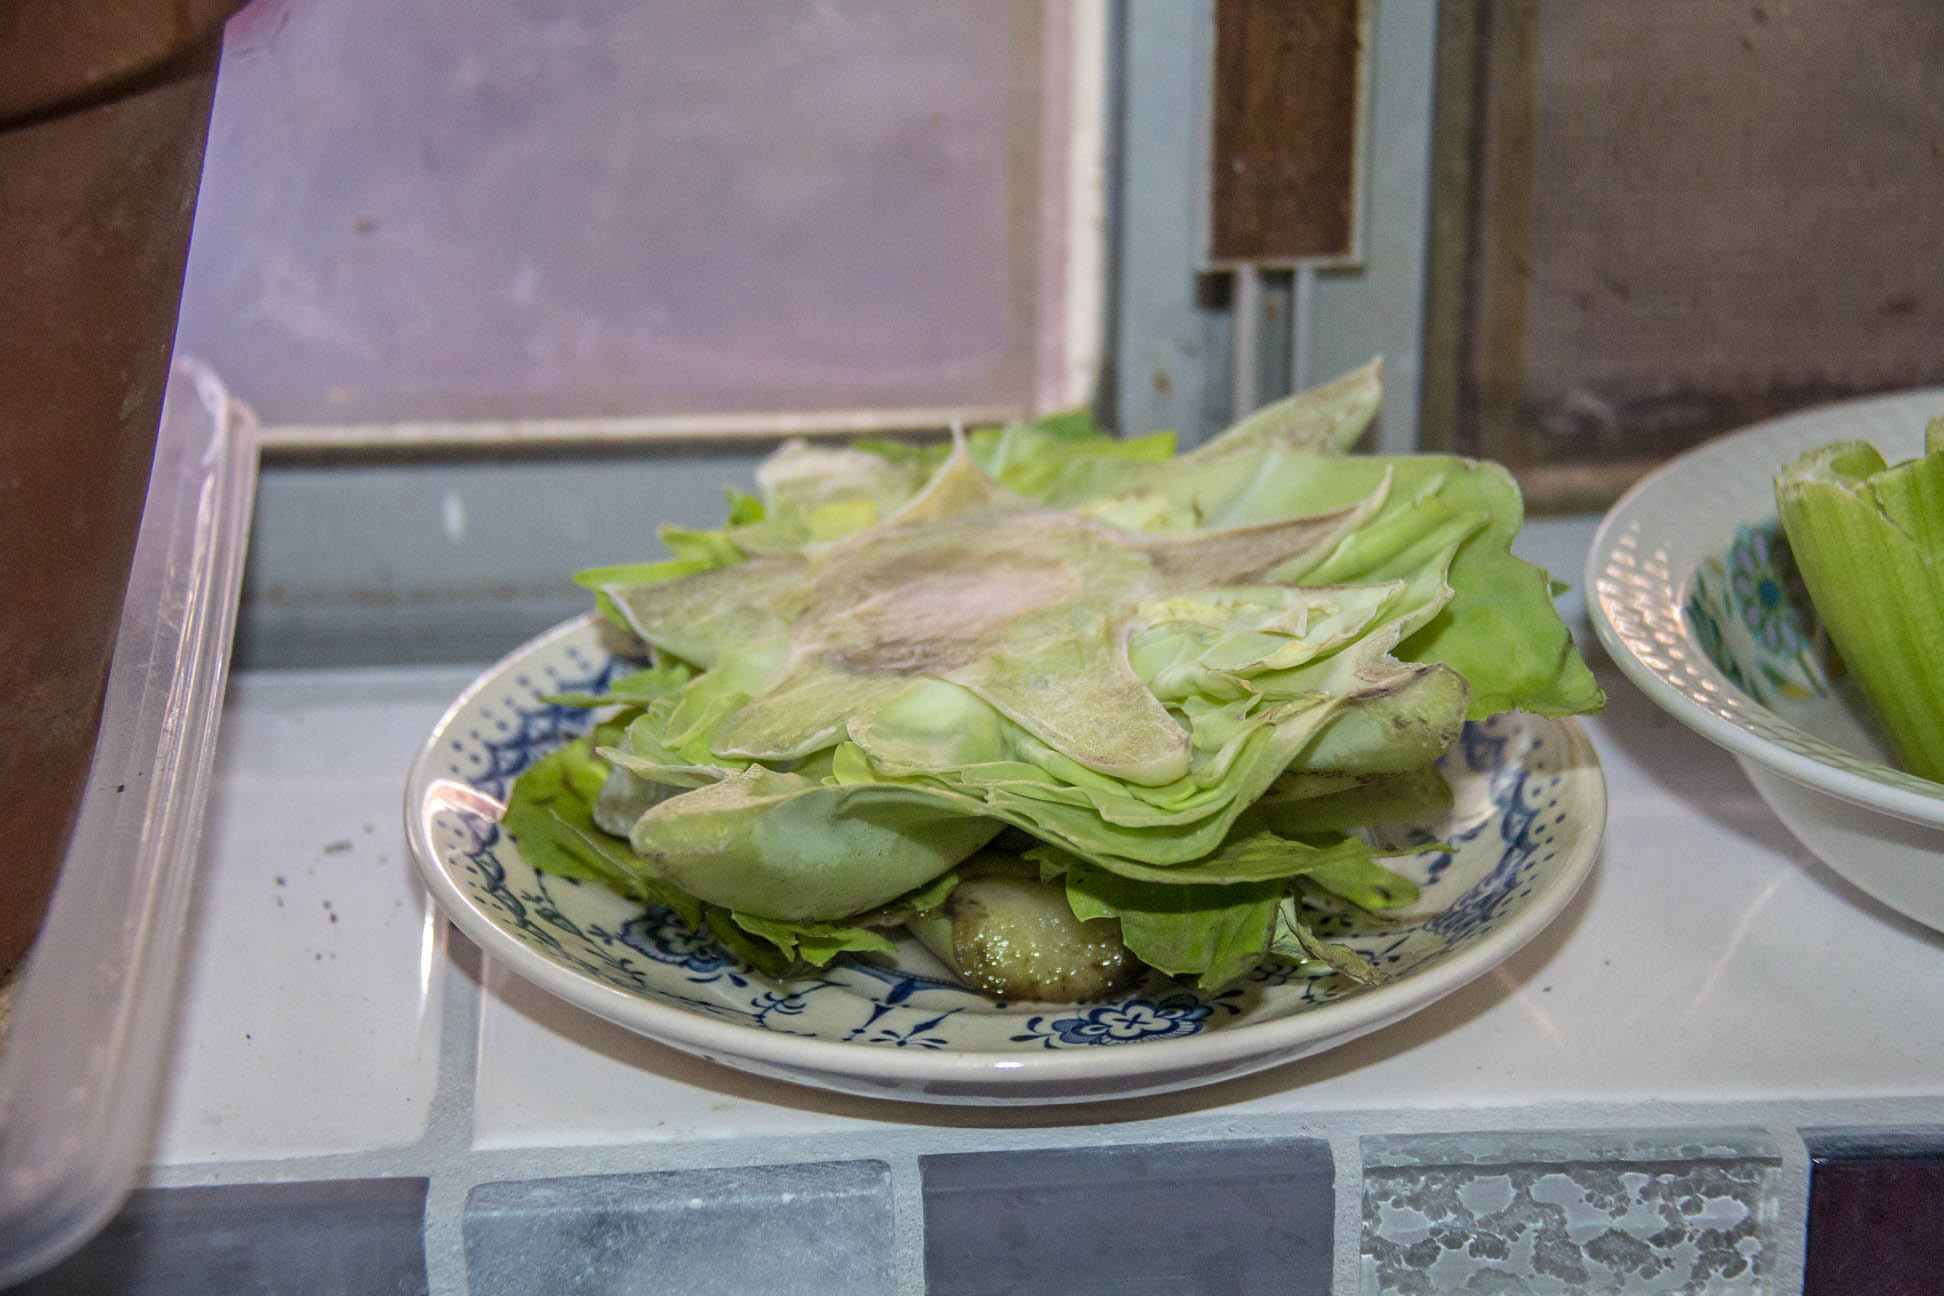 15/04/15 Day 1: Chopped off the top bit of the cabbage to use and put the bottom bit on a plate with a bit of water.